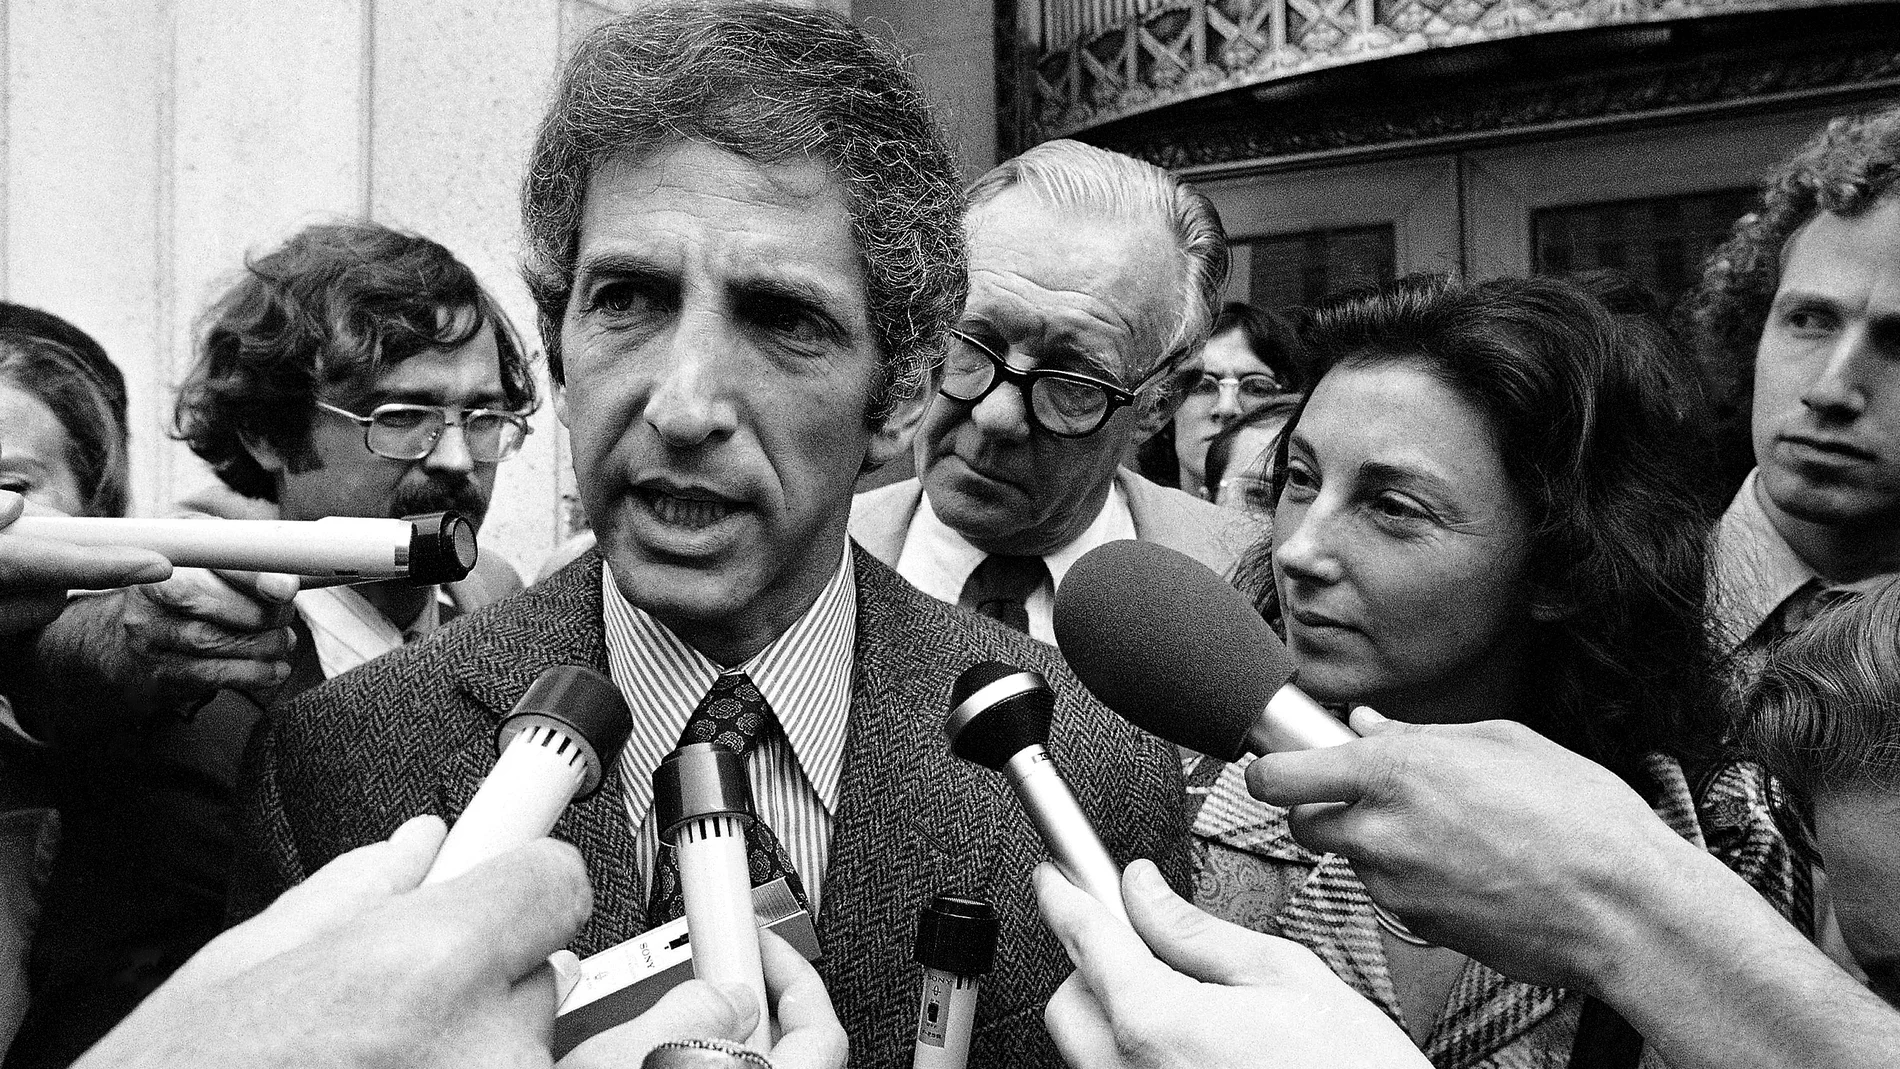 FILE - Daniel Ellsberg, co-defendant in the Pentagon Papers case, talks to media outside the Federal Building in Los Angeles, April 28, 1973. Ellsberg, the government analyst and whistleblower who leaked the “Pentagon Papers” in 1971, has died. He was 92. (AP Photo/Wally Fong, File)